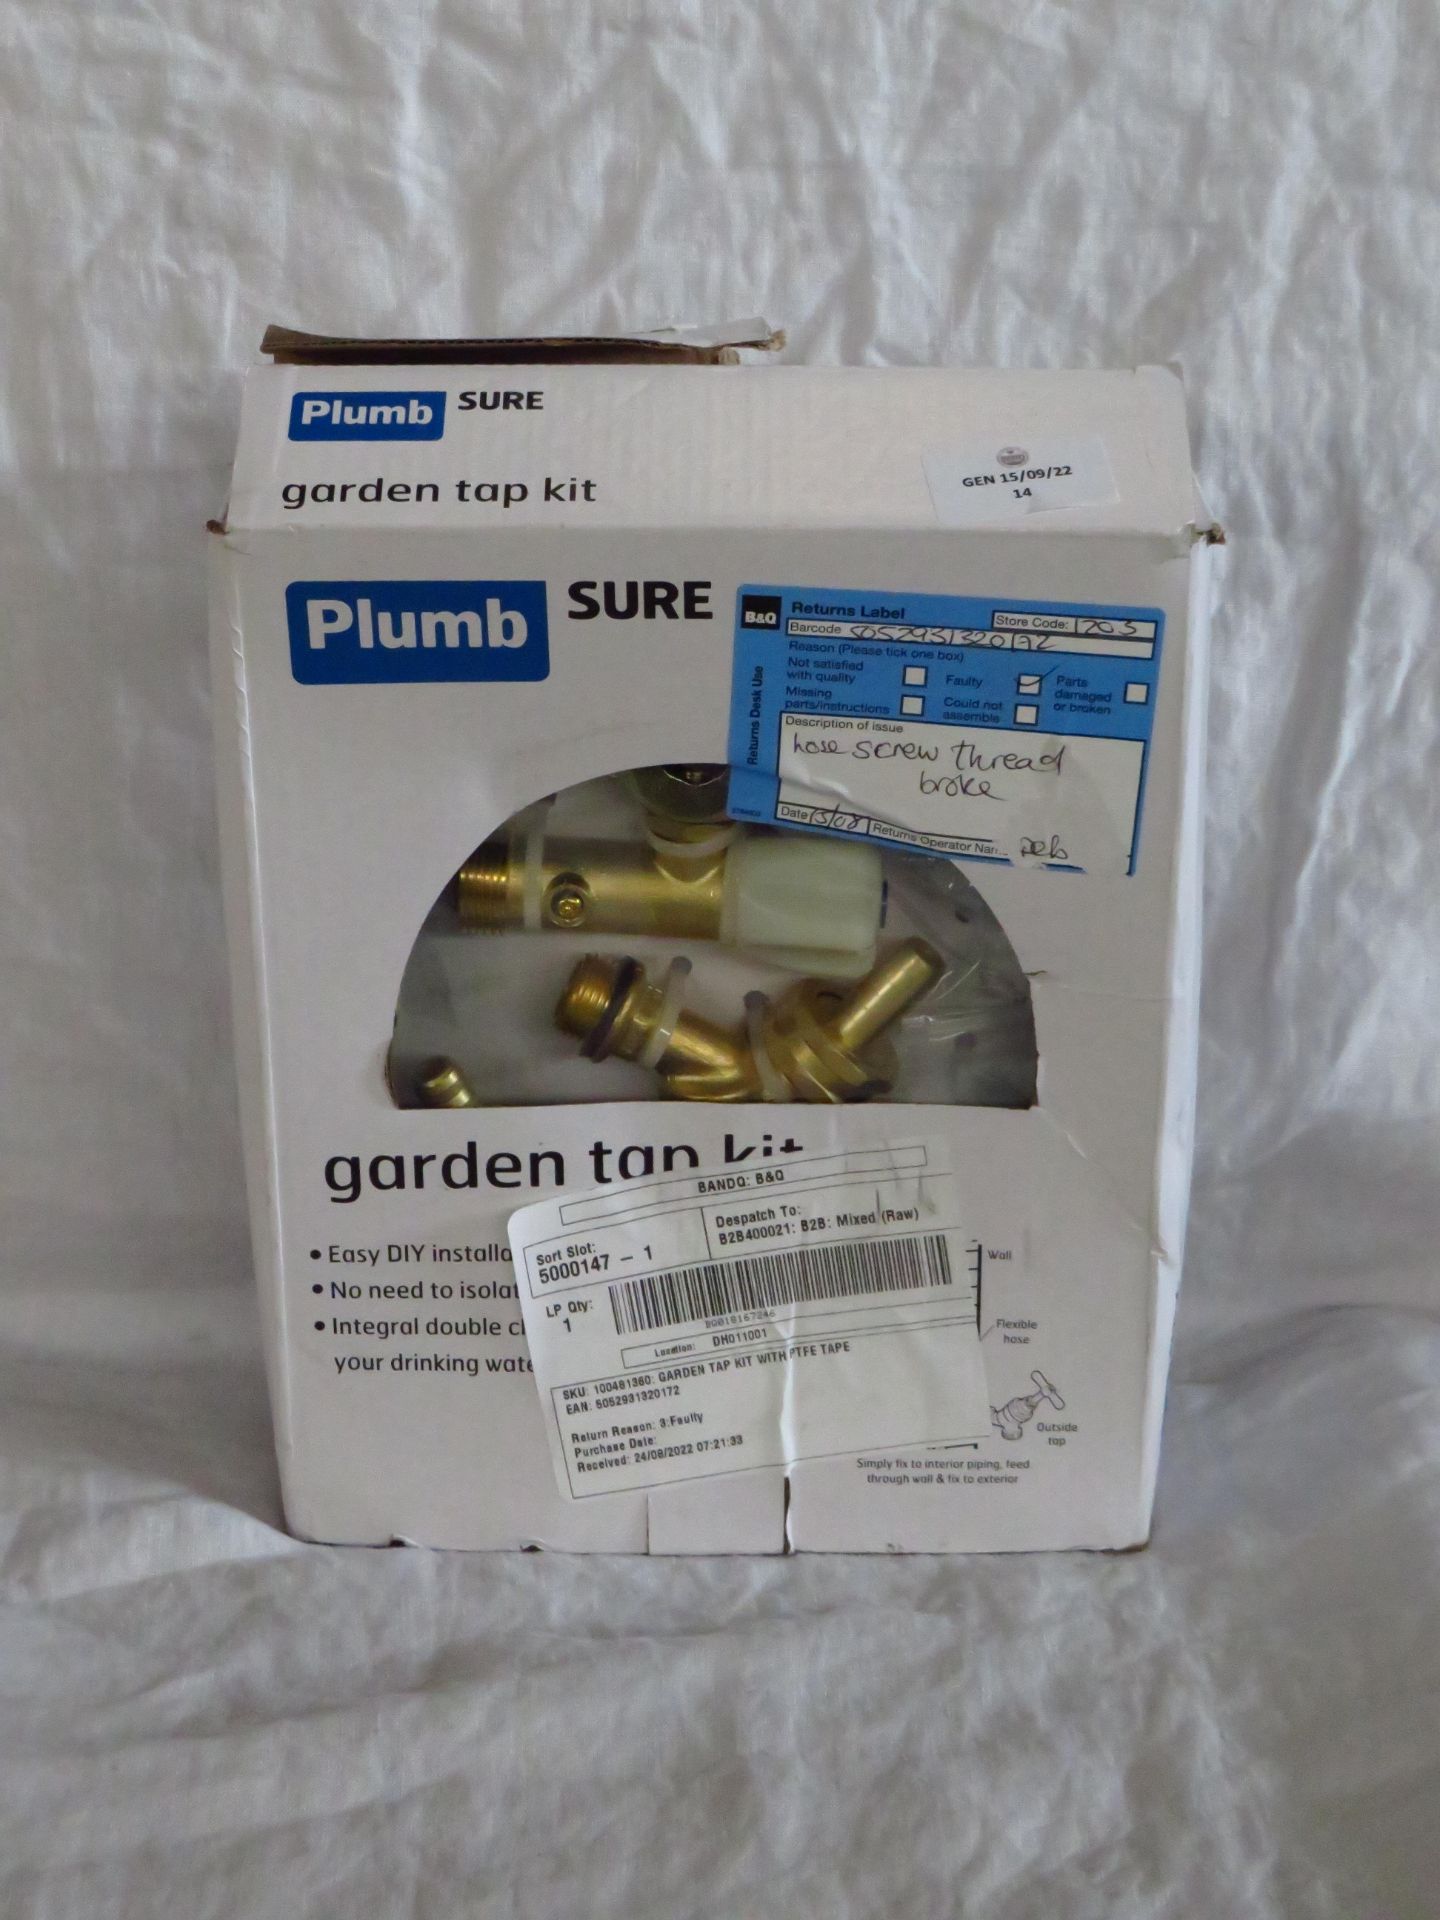 Plumb Sure garden tap kit, unchecked and boxed.